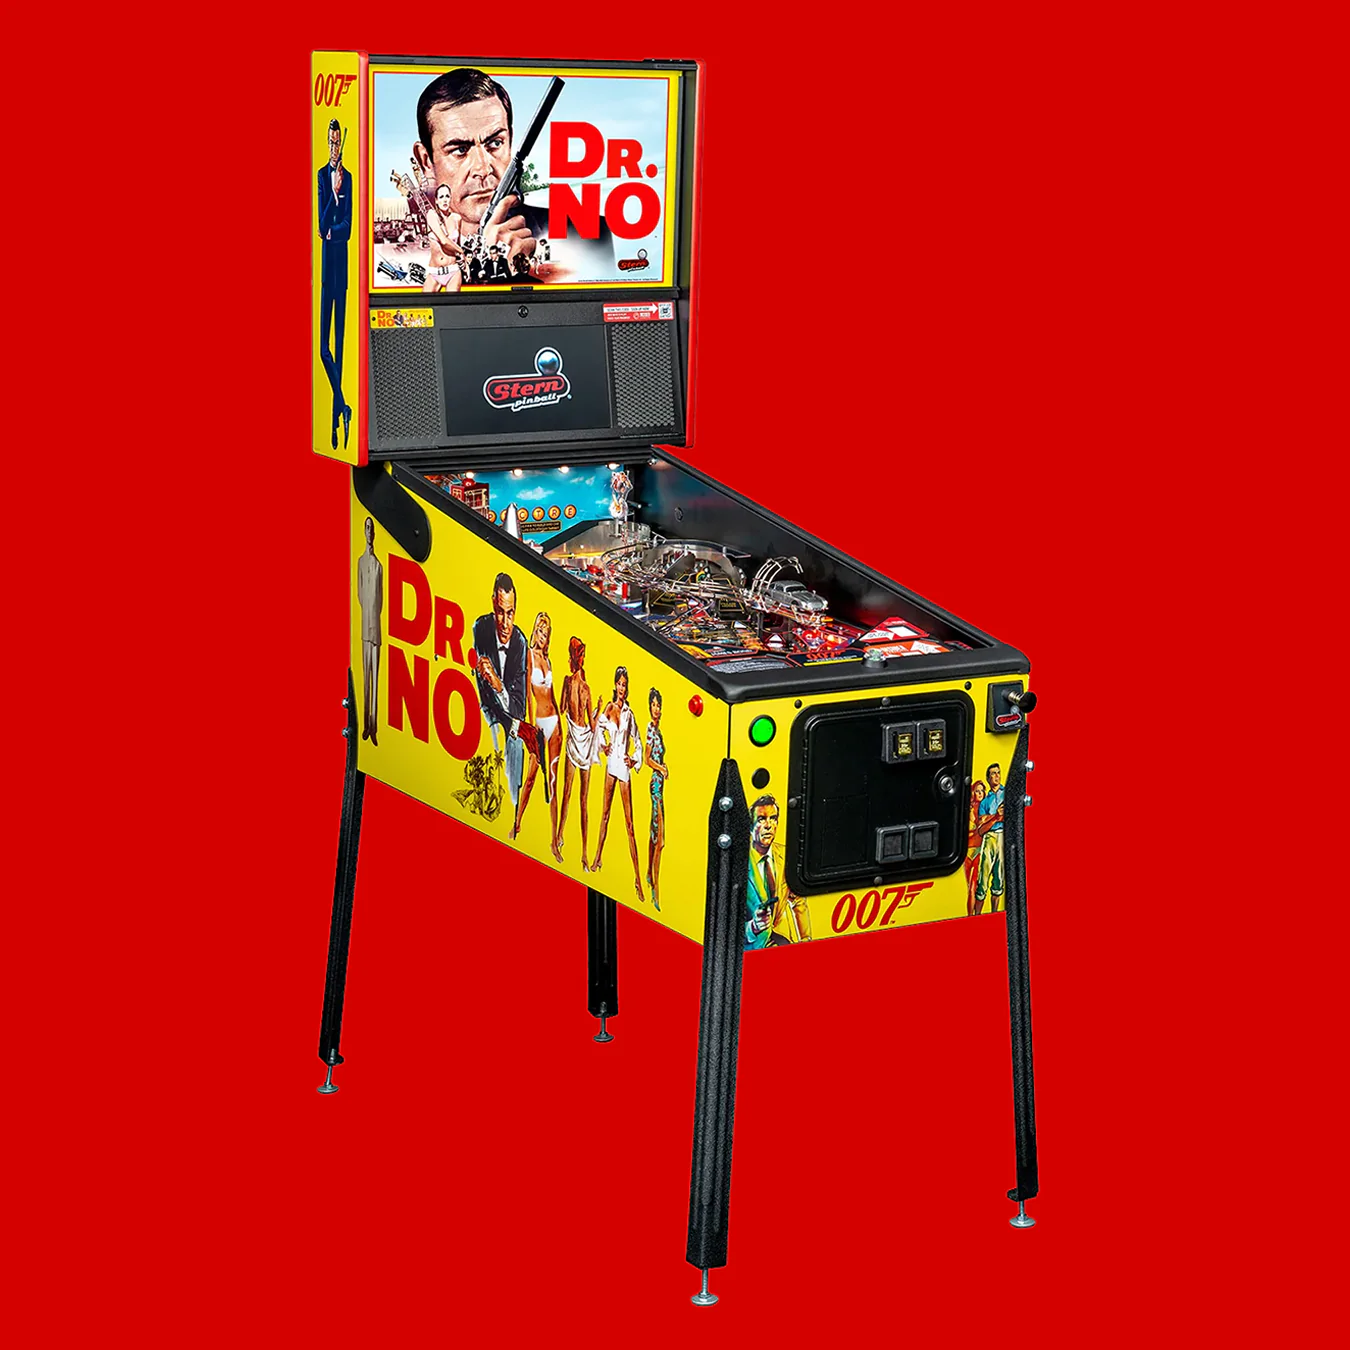 The Ultimate Guide to Stern's James Bond 007 Pro – Dr. No Pinball Machine